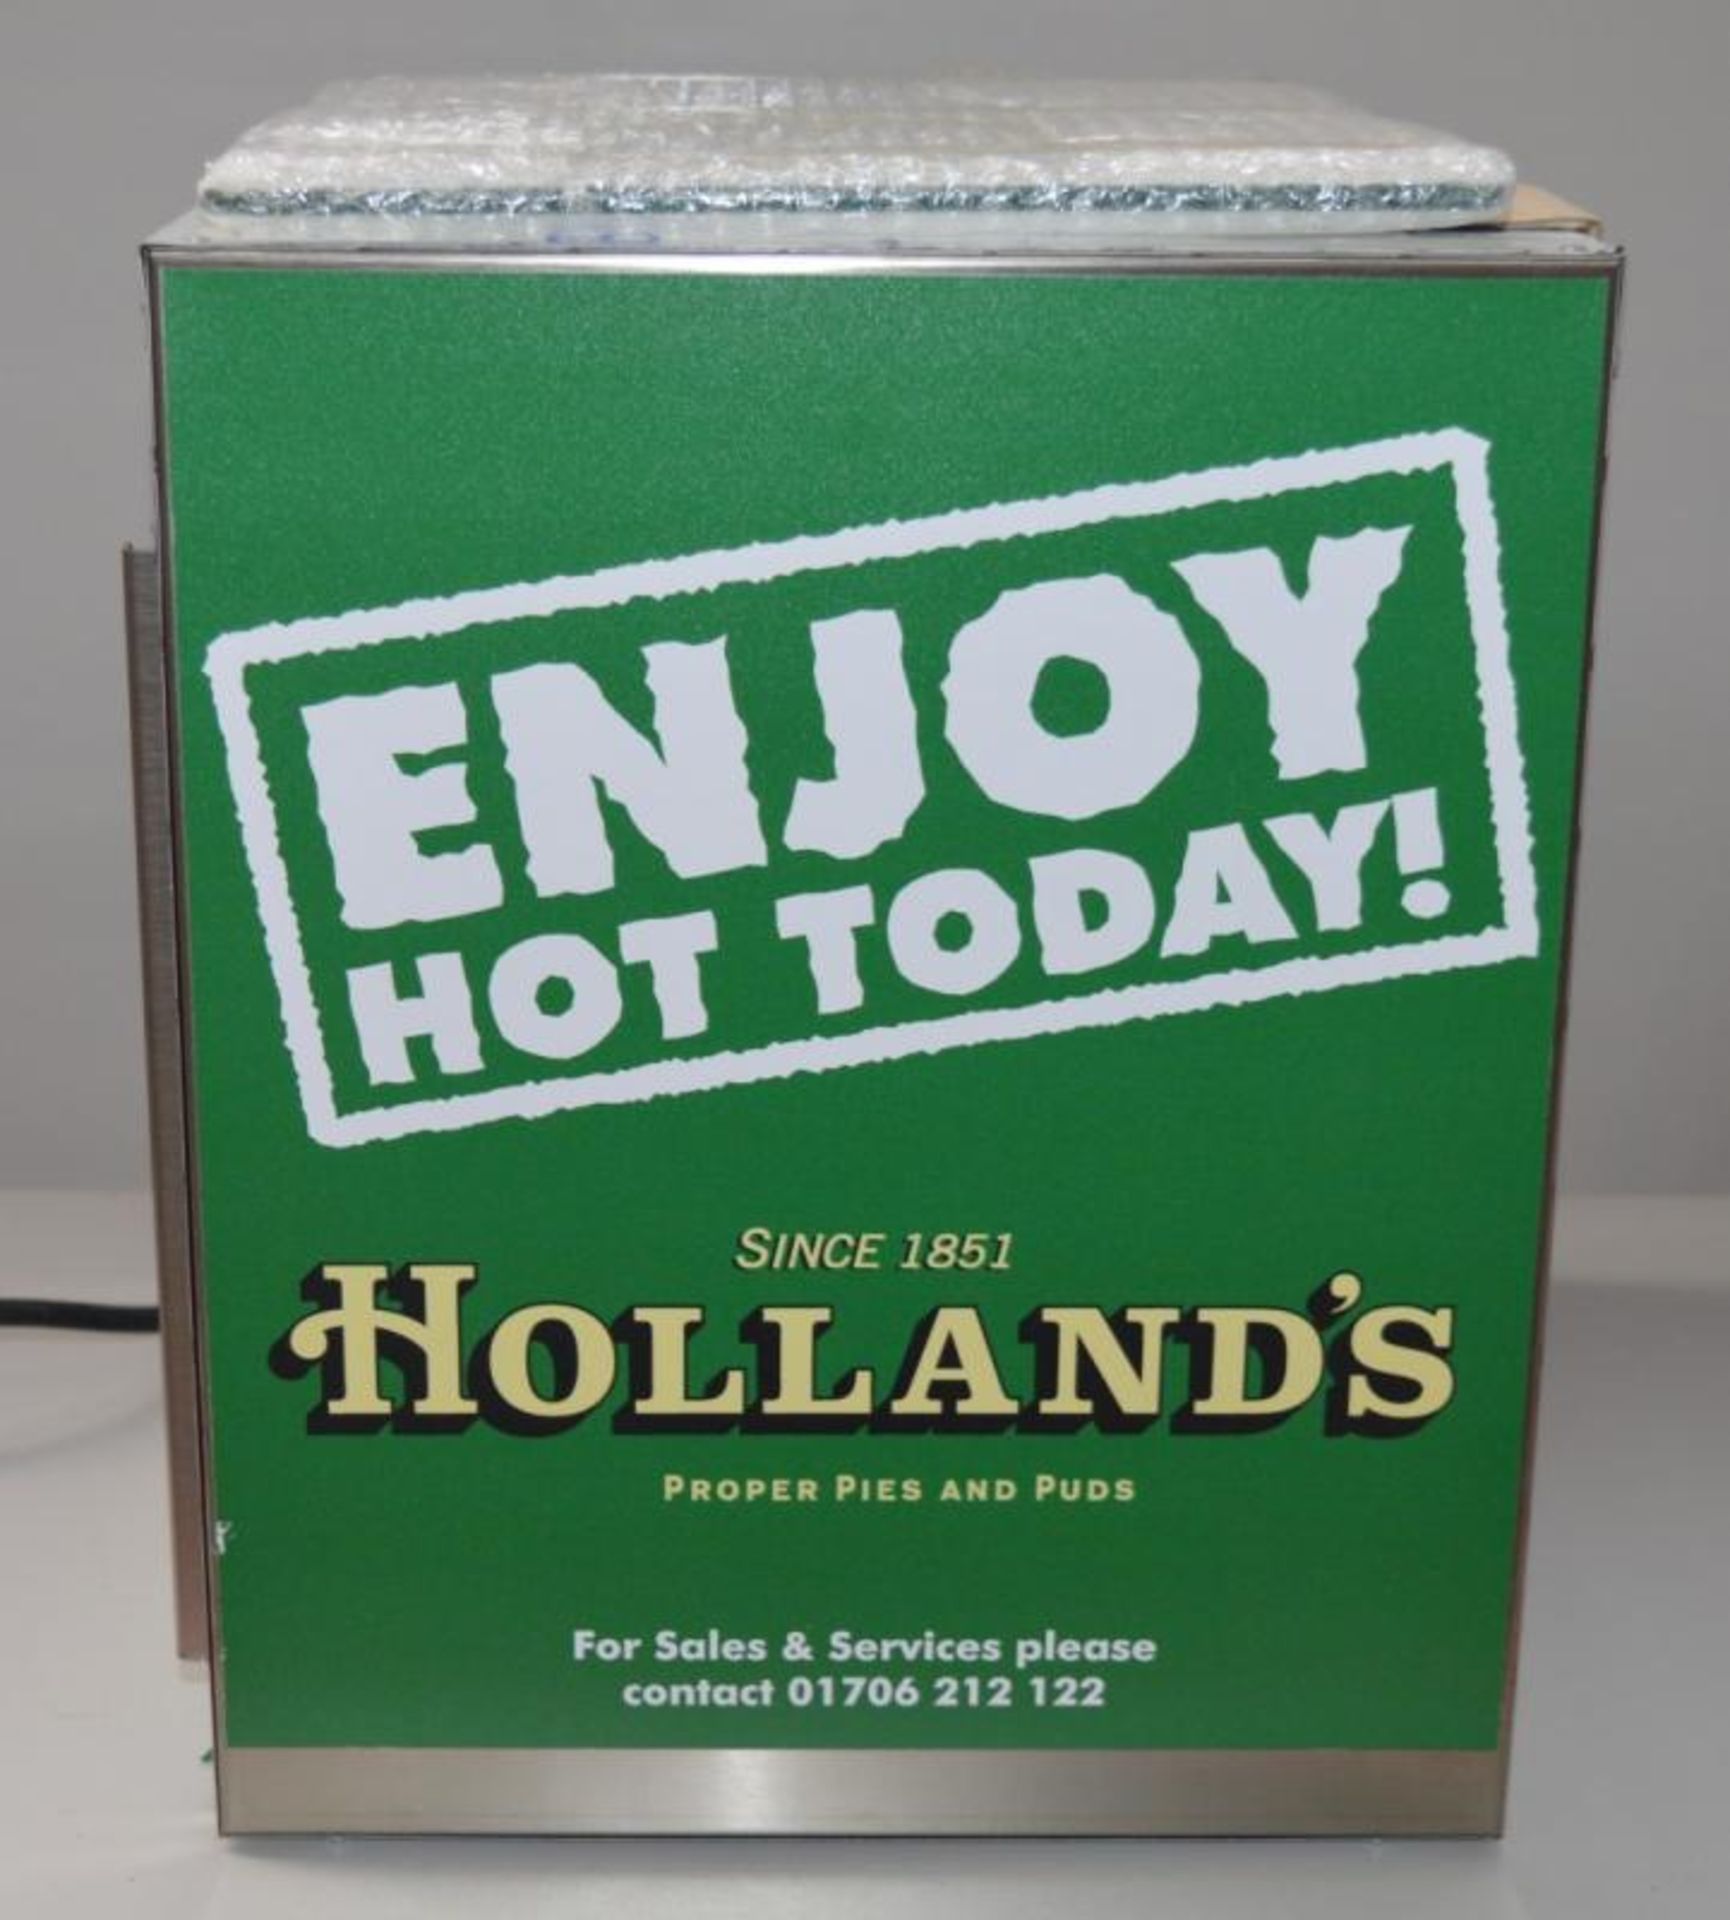 1 x Parry Electric Pie Warming Cabinet - Hollands Pie Edition - New and Unused - Features - Image 4 of 9